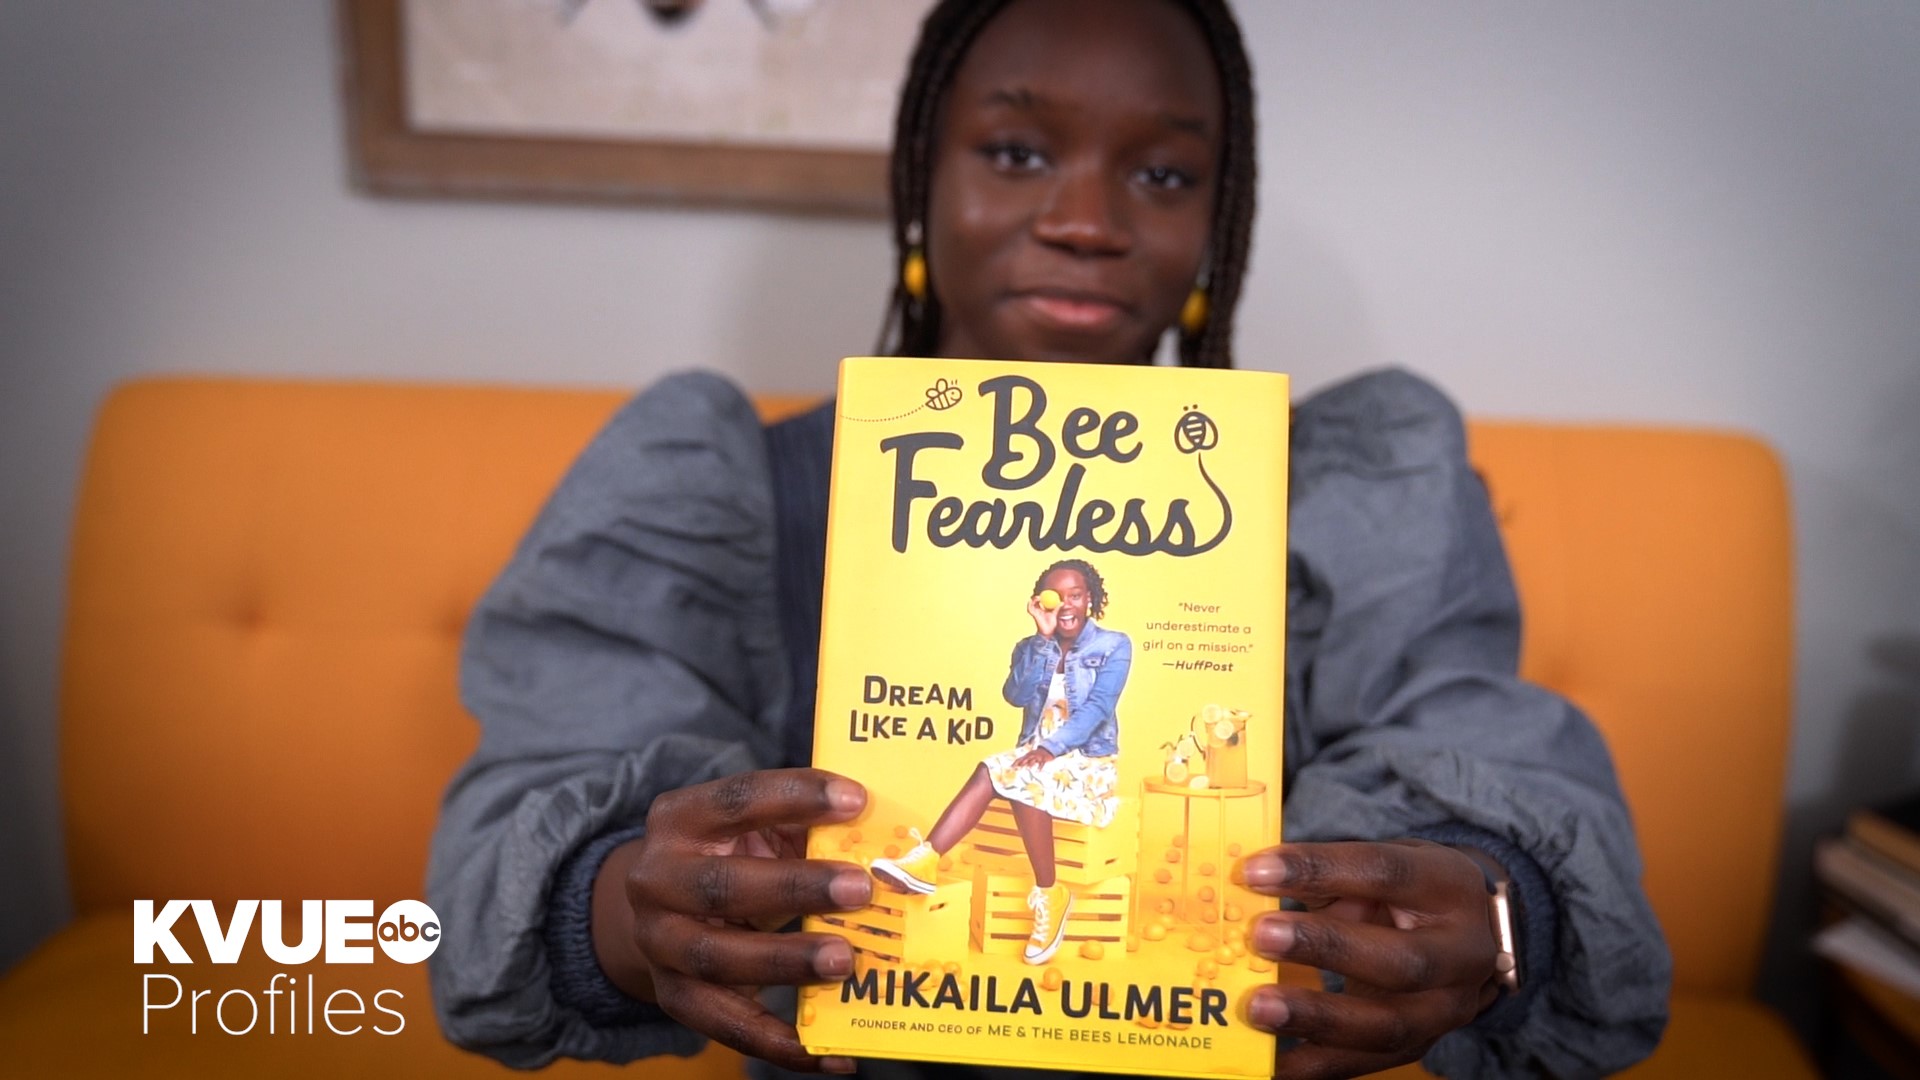 This 17-year-old turned her fear of bees into a sweet mission of saving them while developing a nationally known lemonade brand.